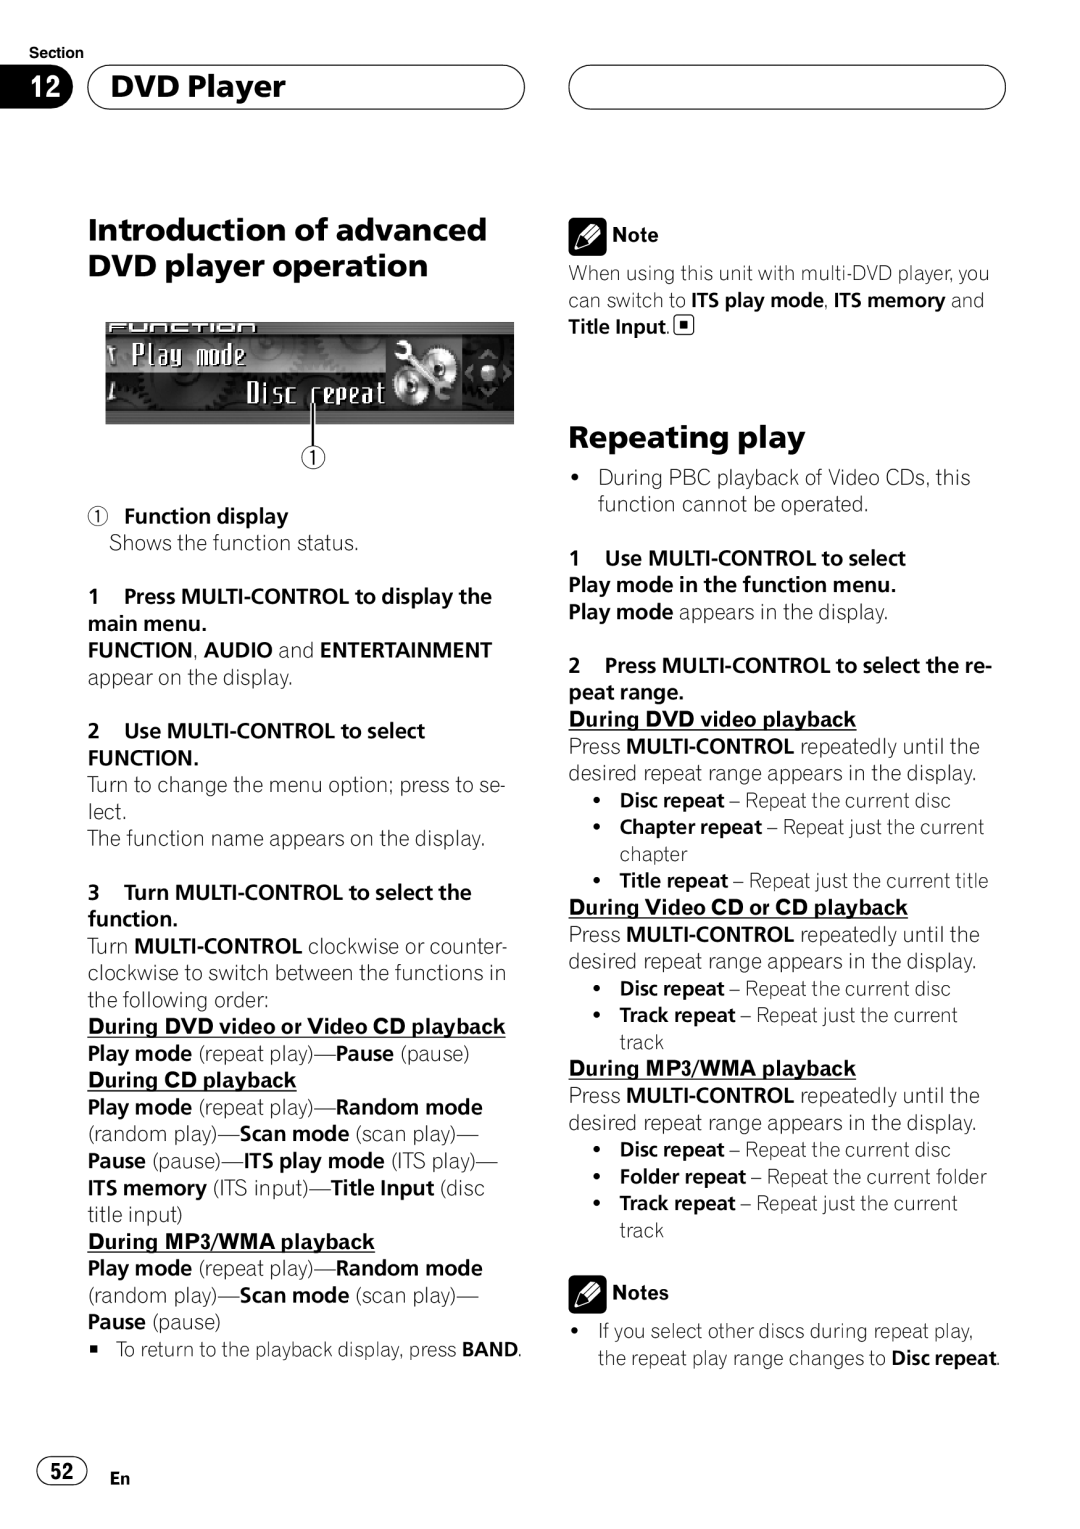 Sirius Satellite Radio DEH-P7800MP DVD Player, Introduction of advanced DVD player operation, Repeating play 